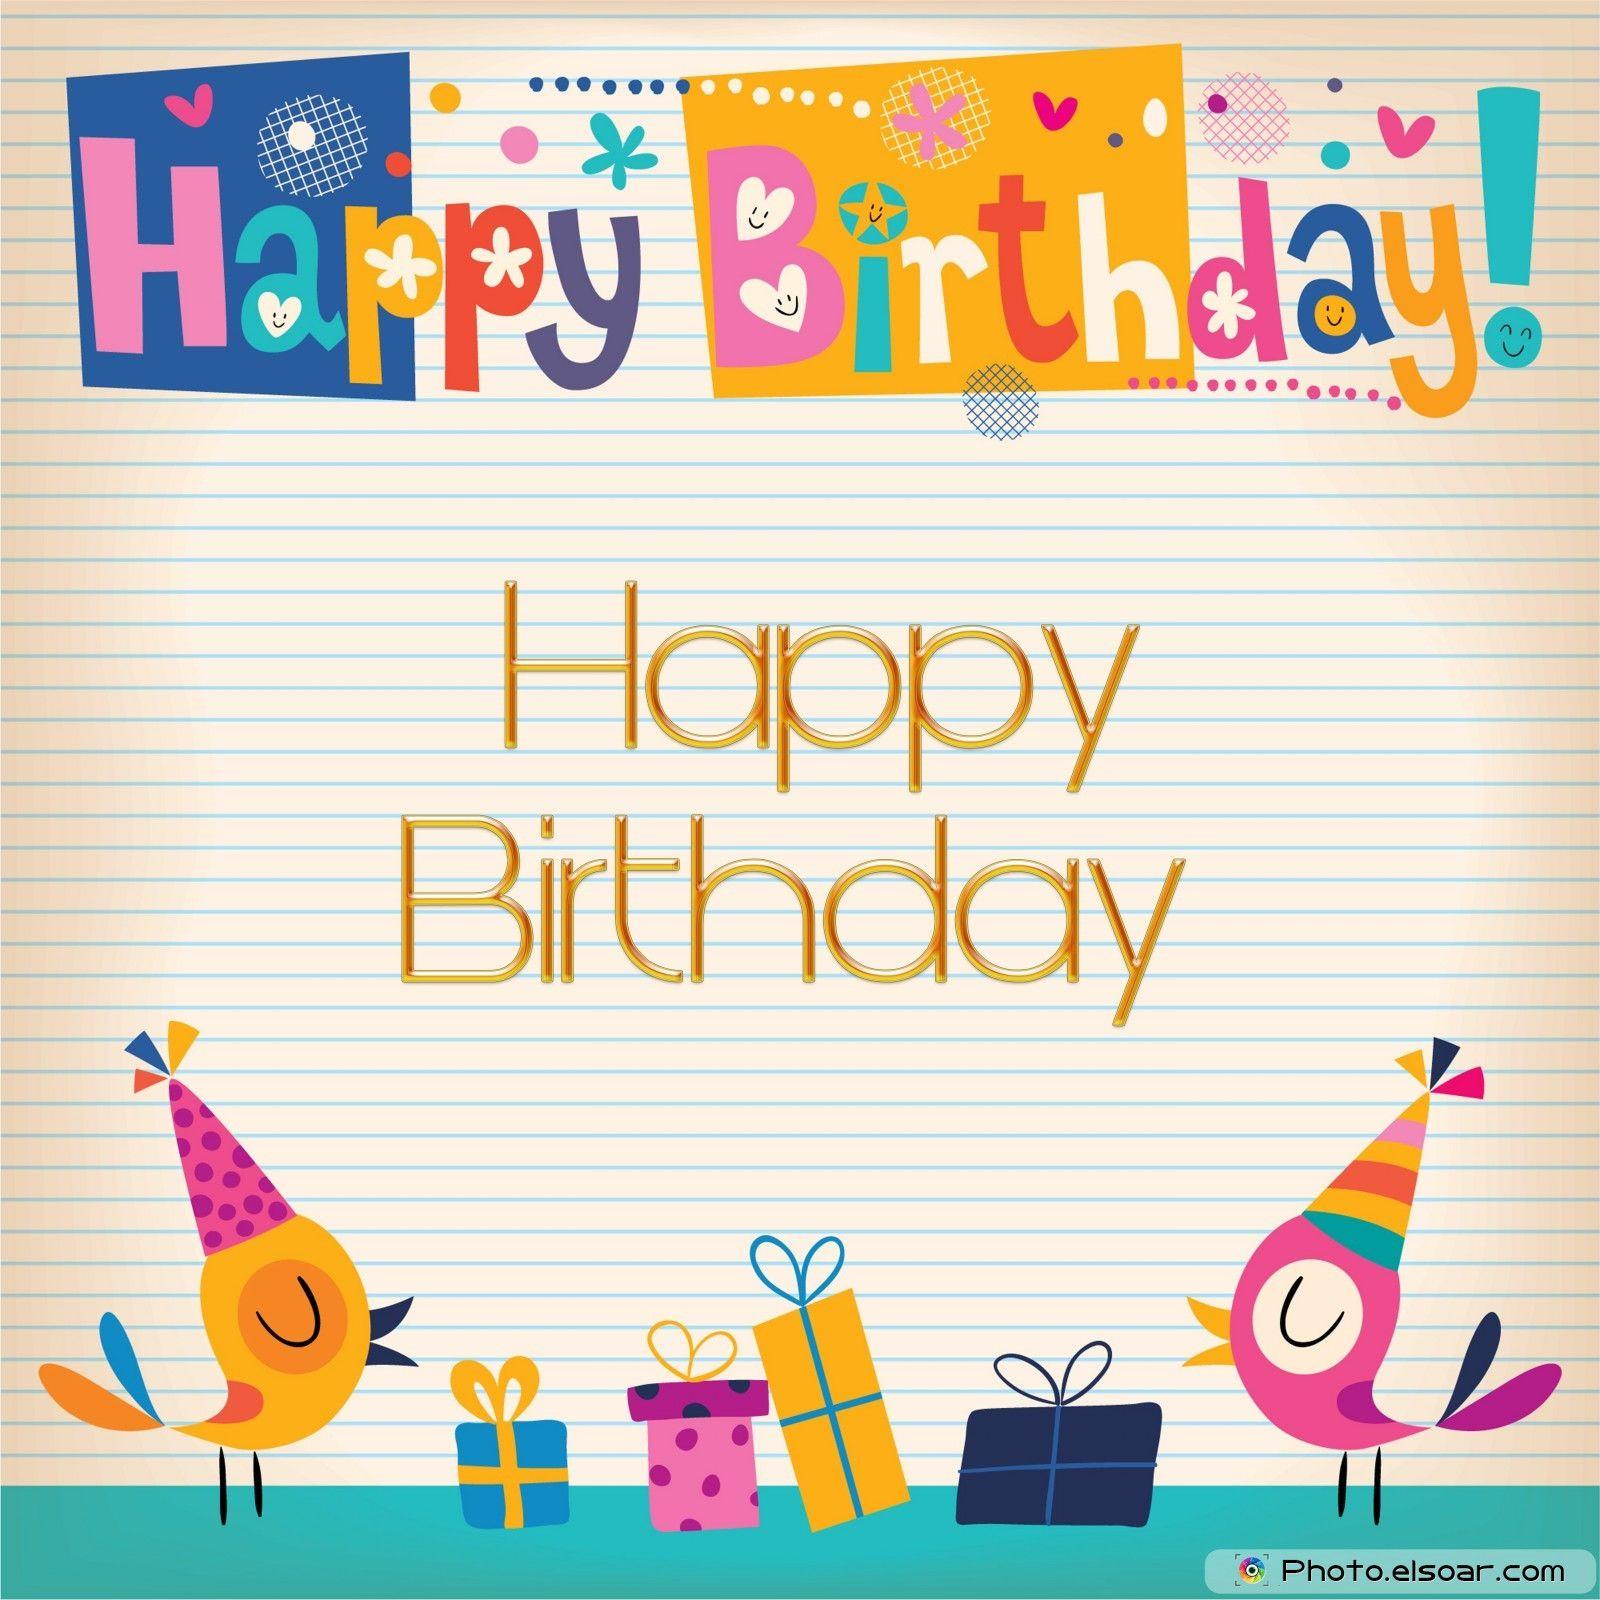 Happy BirthDay Cards on Bright Background • Elsoar